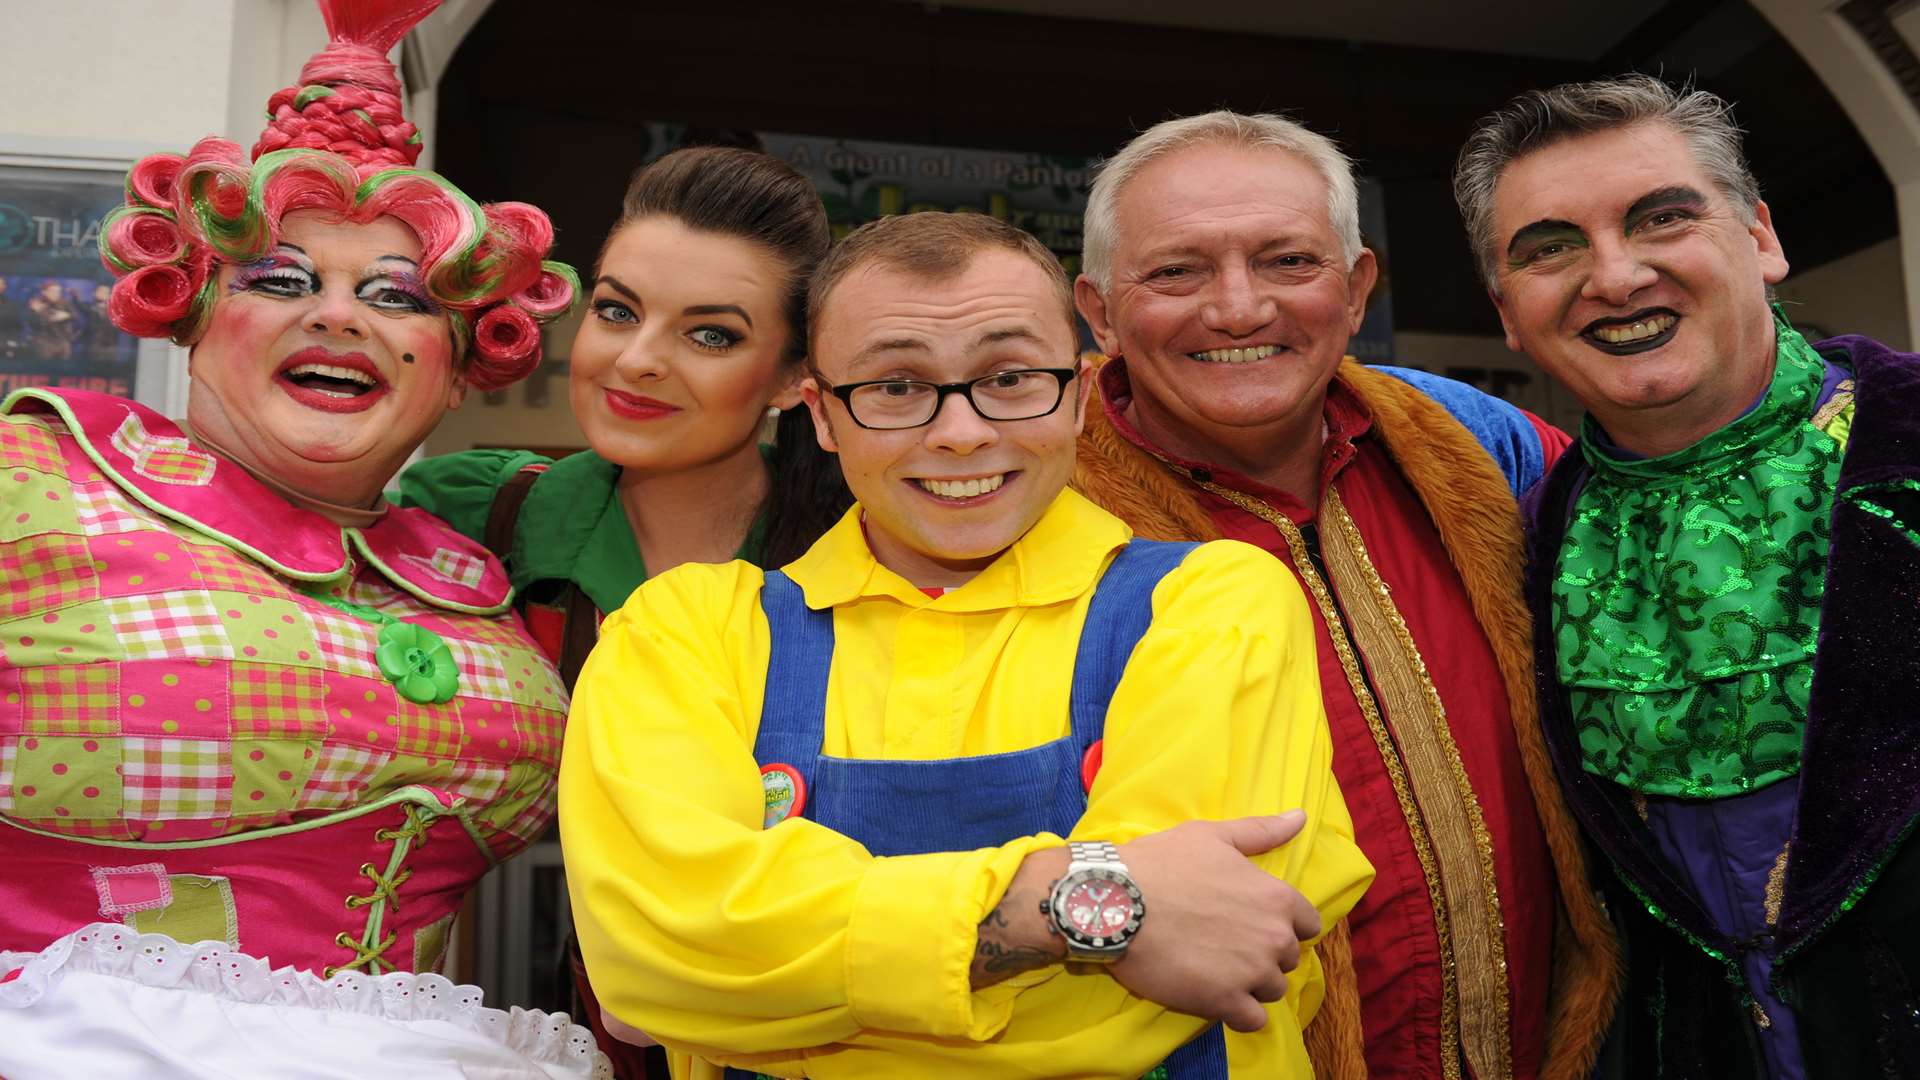 The cast of the Central Theatre panto